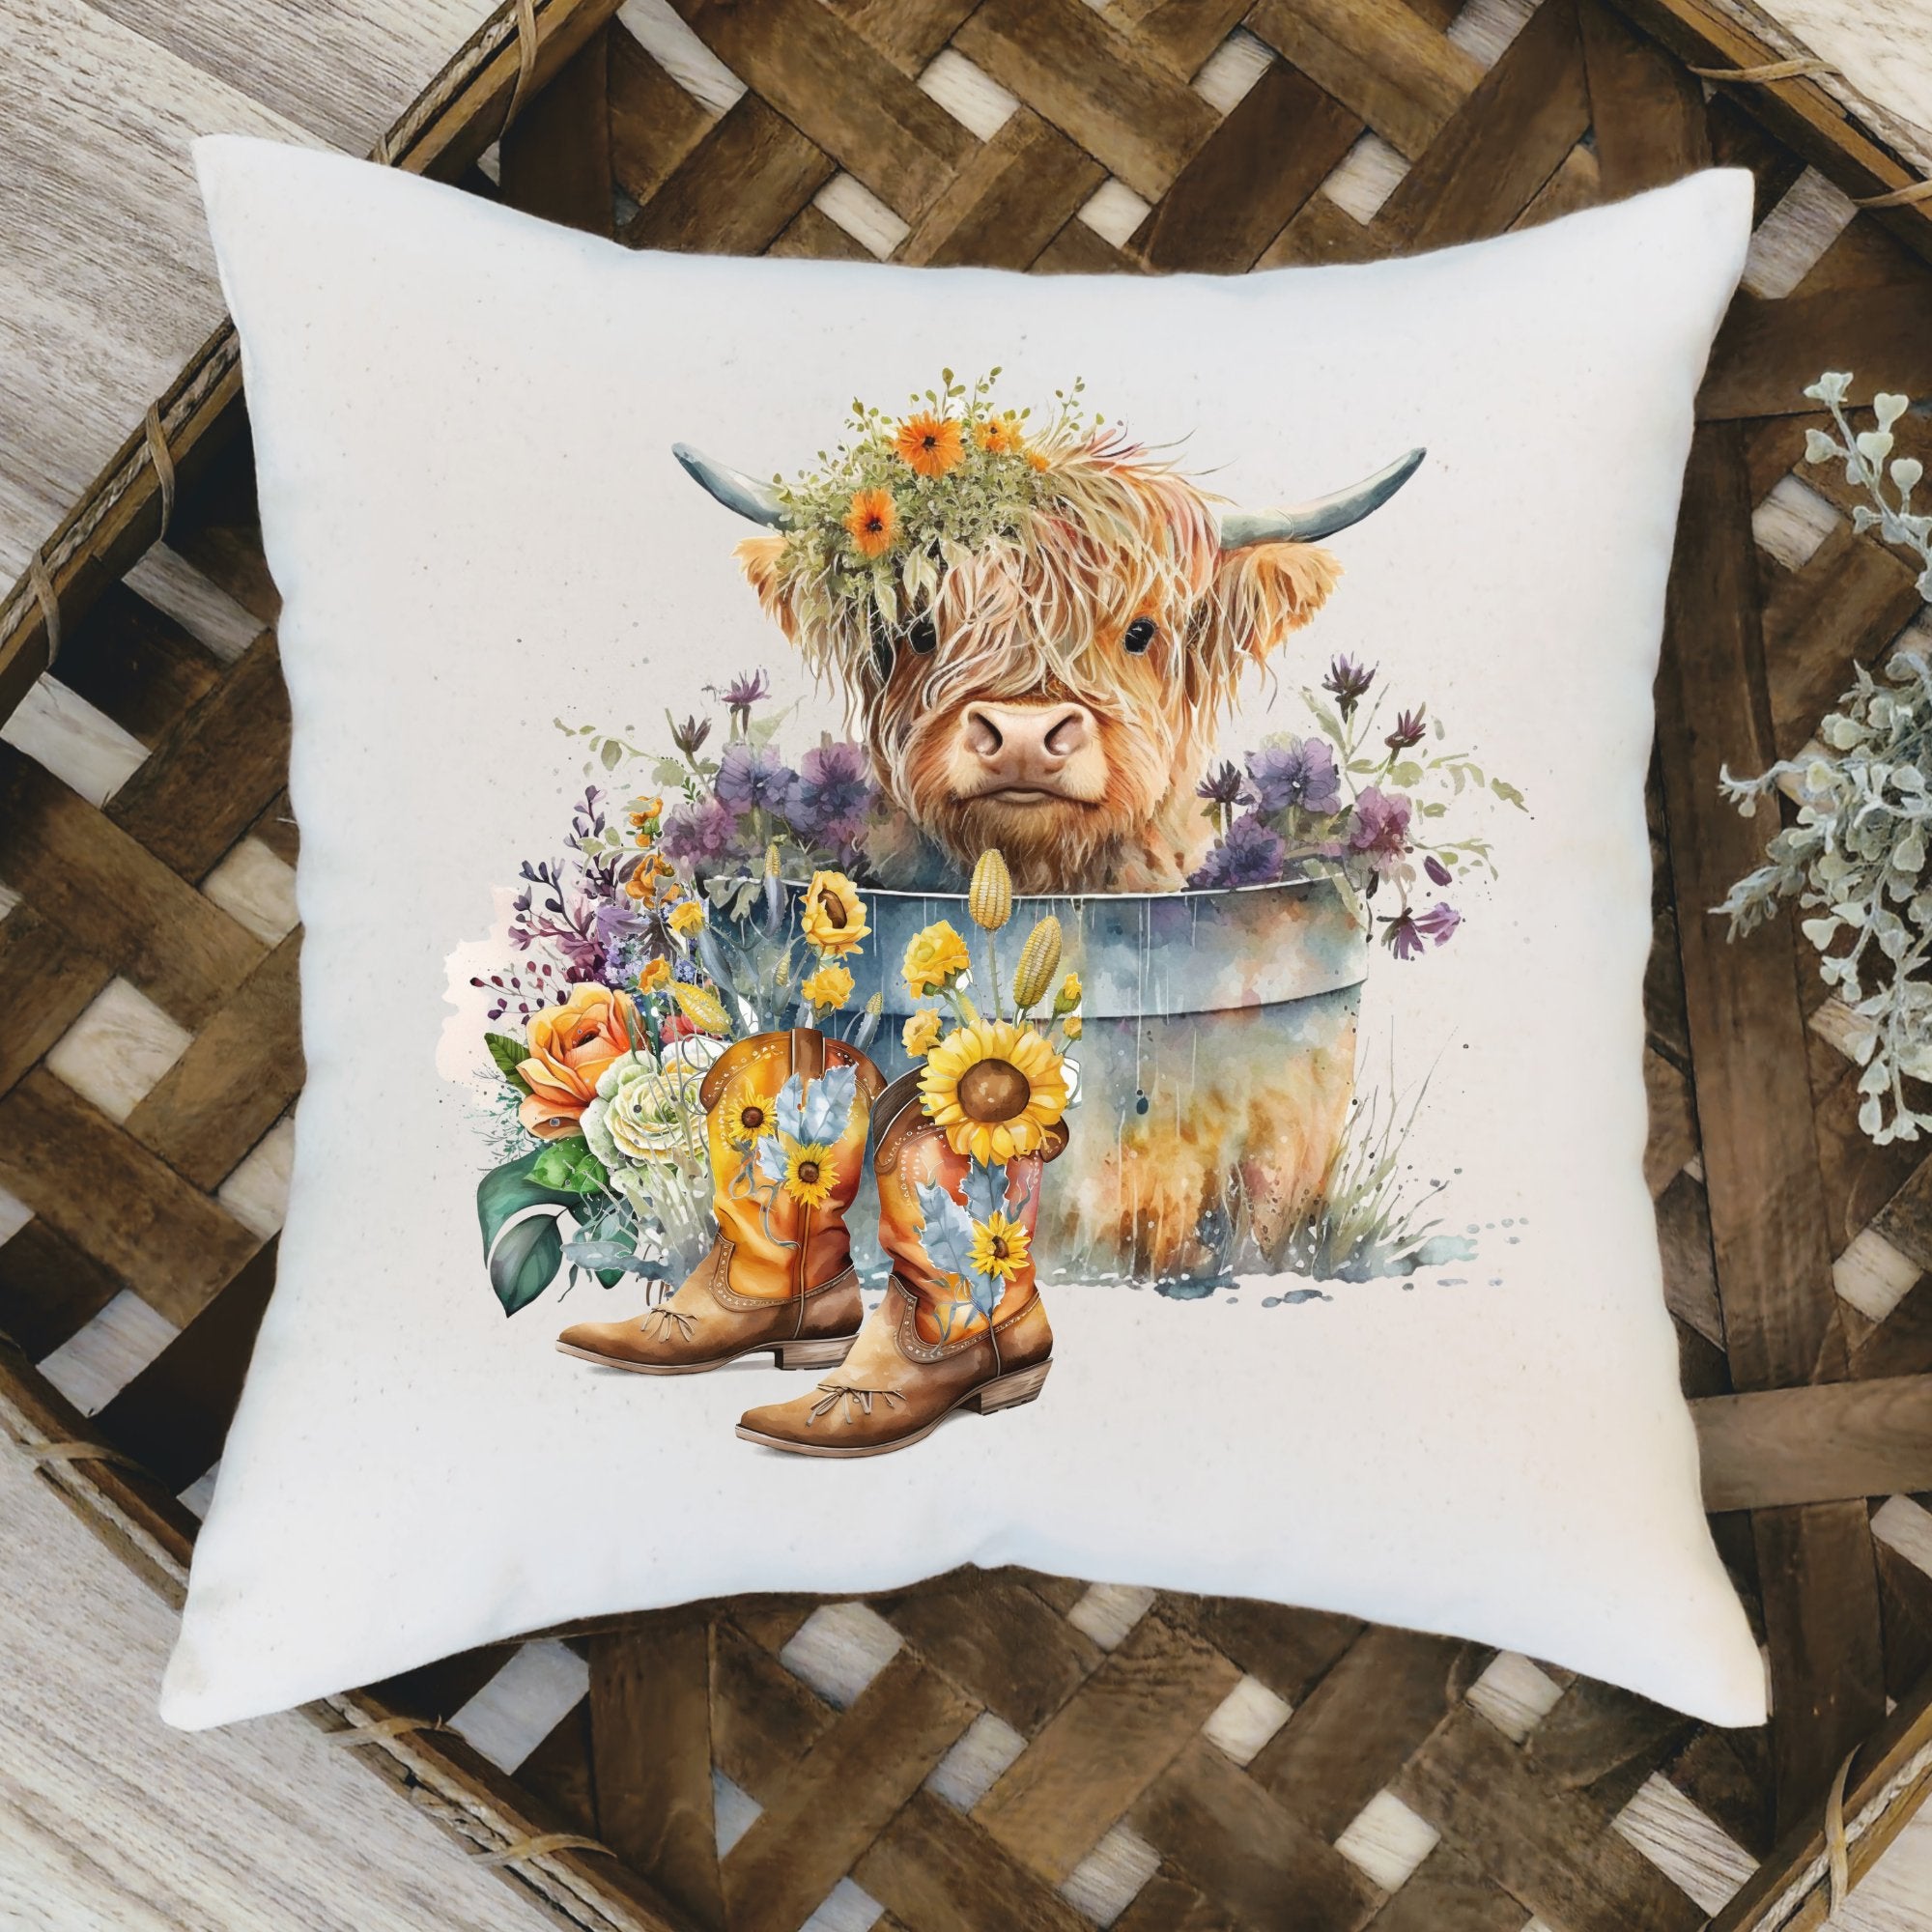 Vintage Highland Cow Pillow Cover - Trendznmore